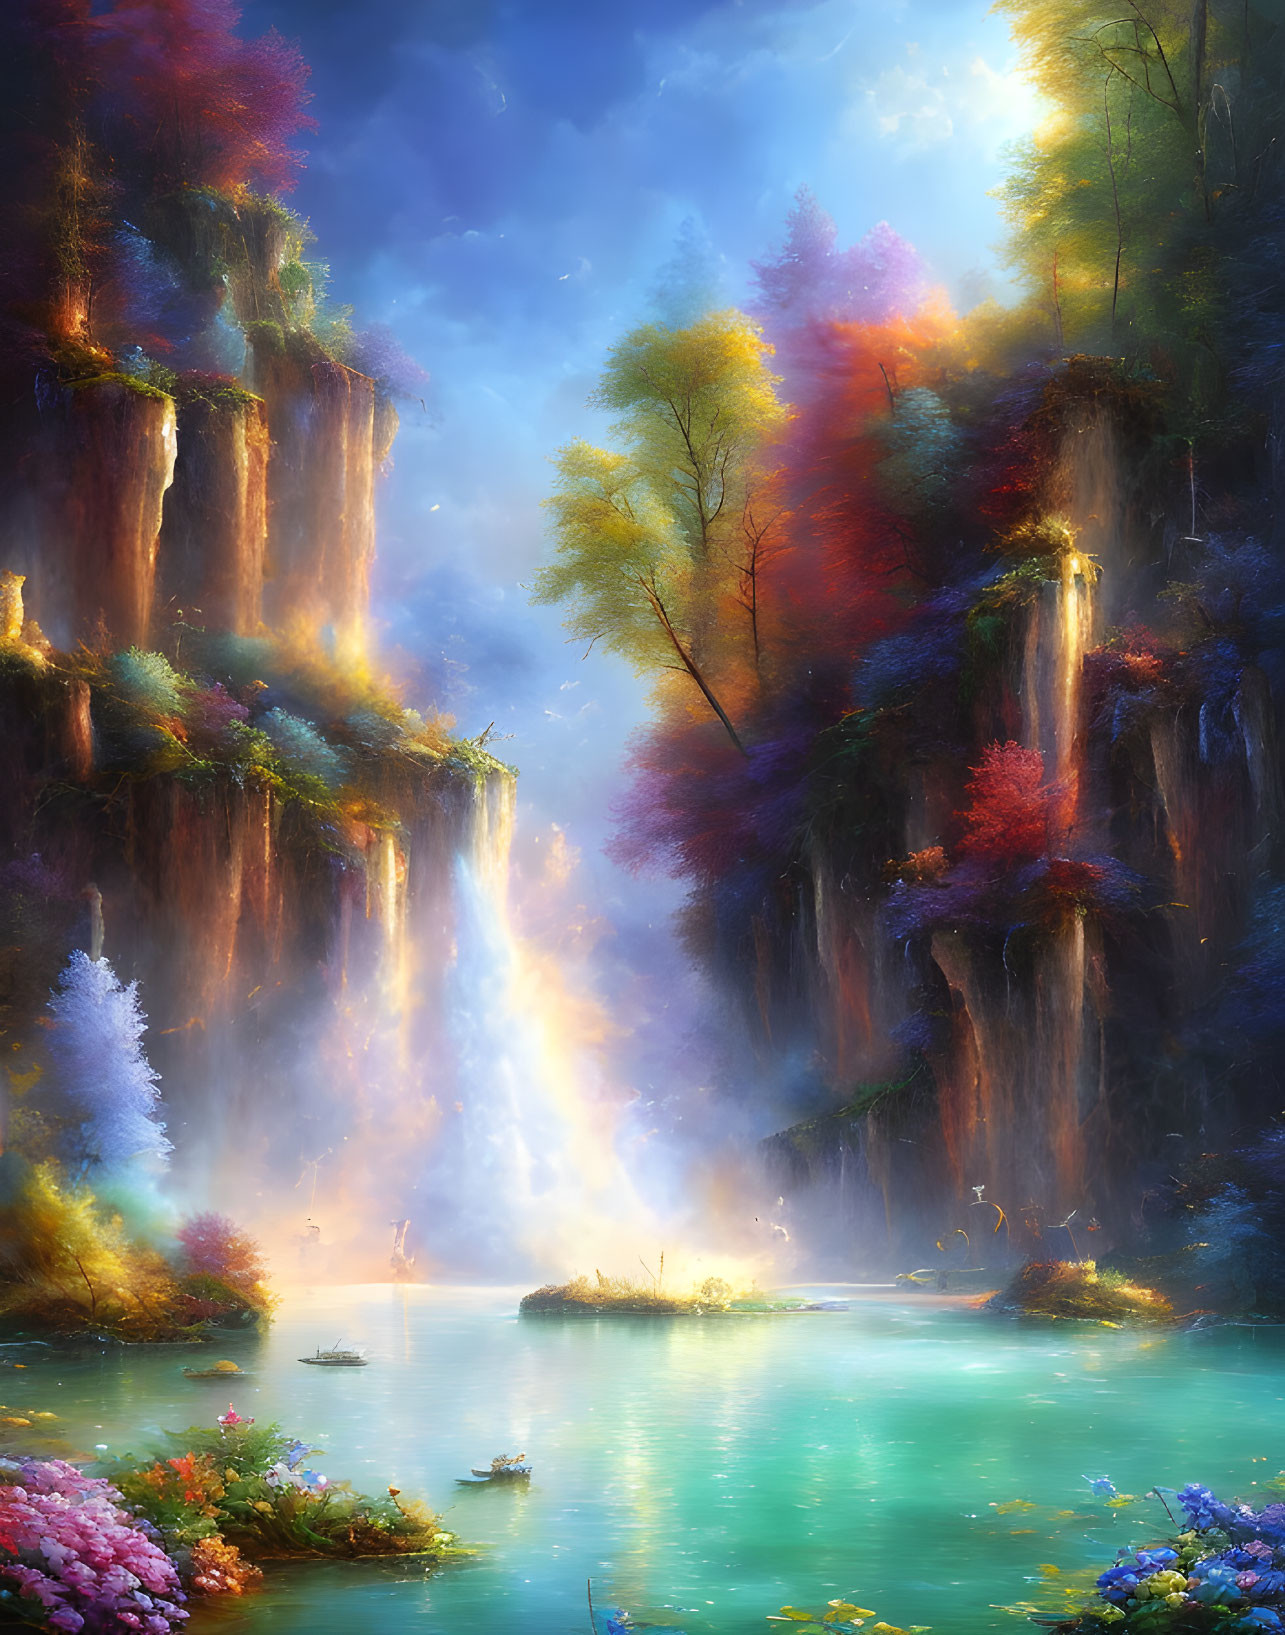 Fantastical landscape with waterfalls, colorful foliage, misty waters, glowing light